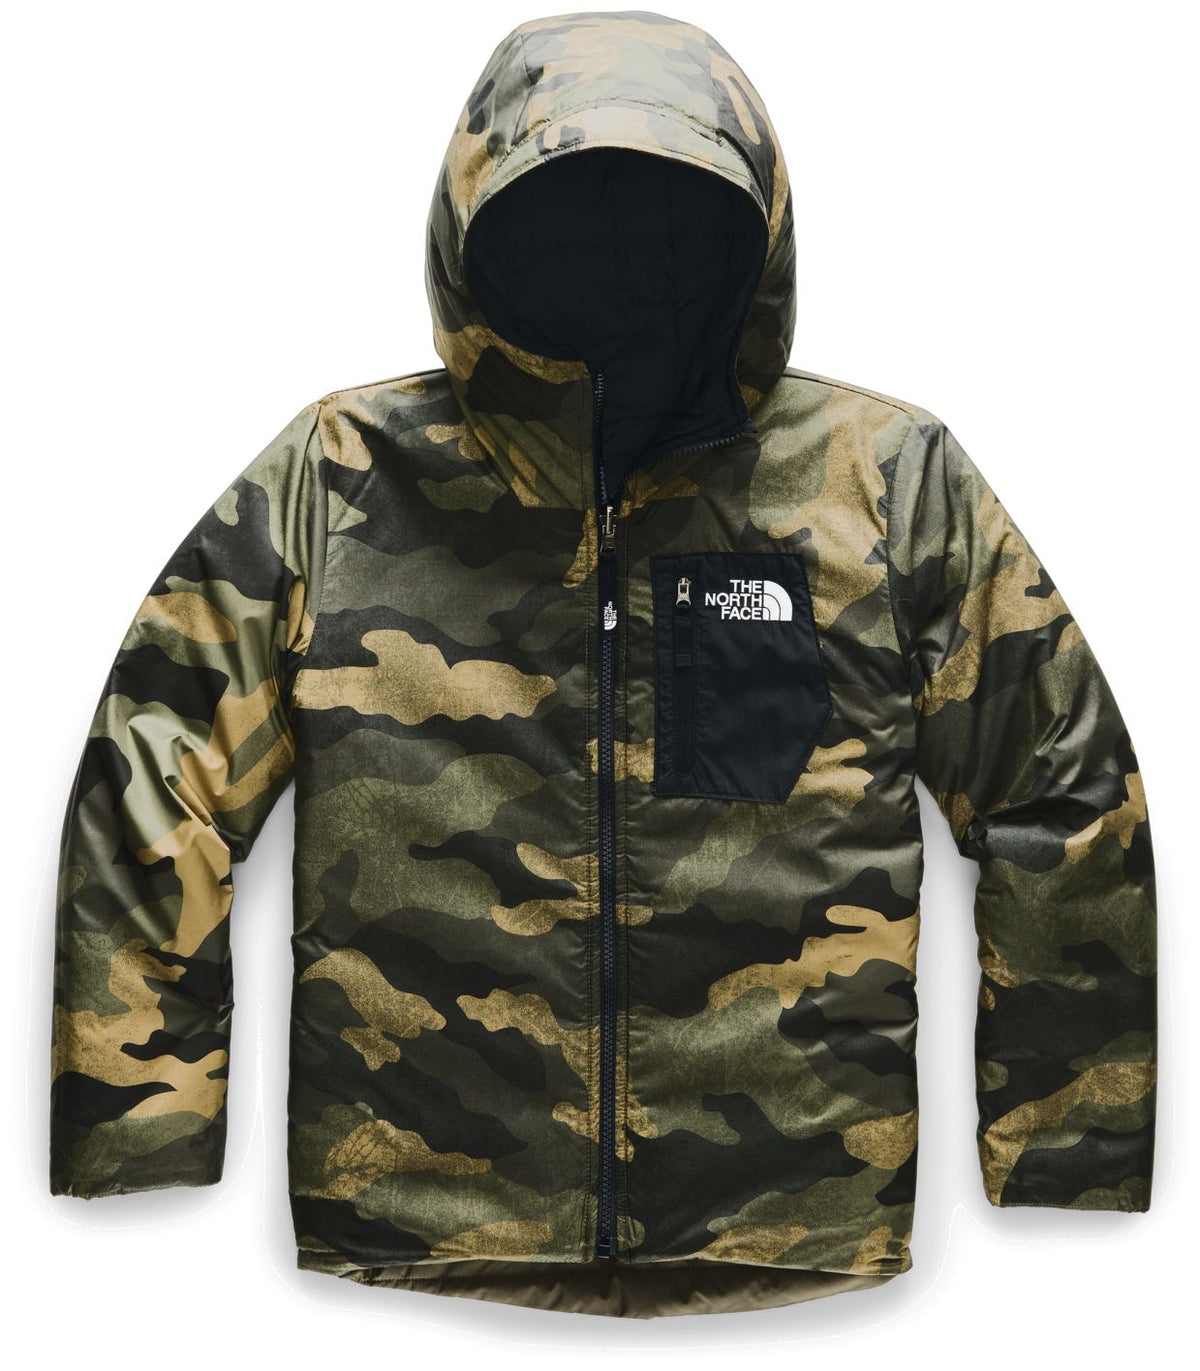 The North Face Reversible Perrito Jacket - Boys' - Gear Coop